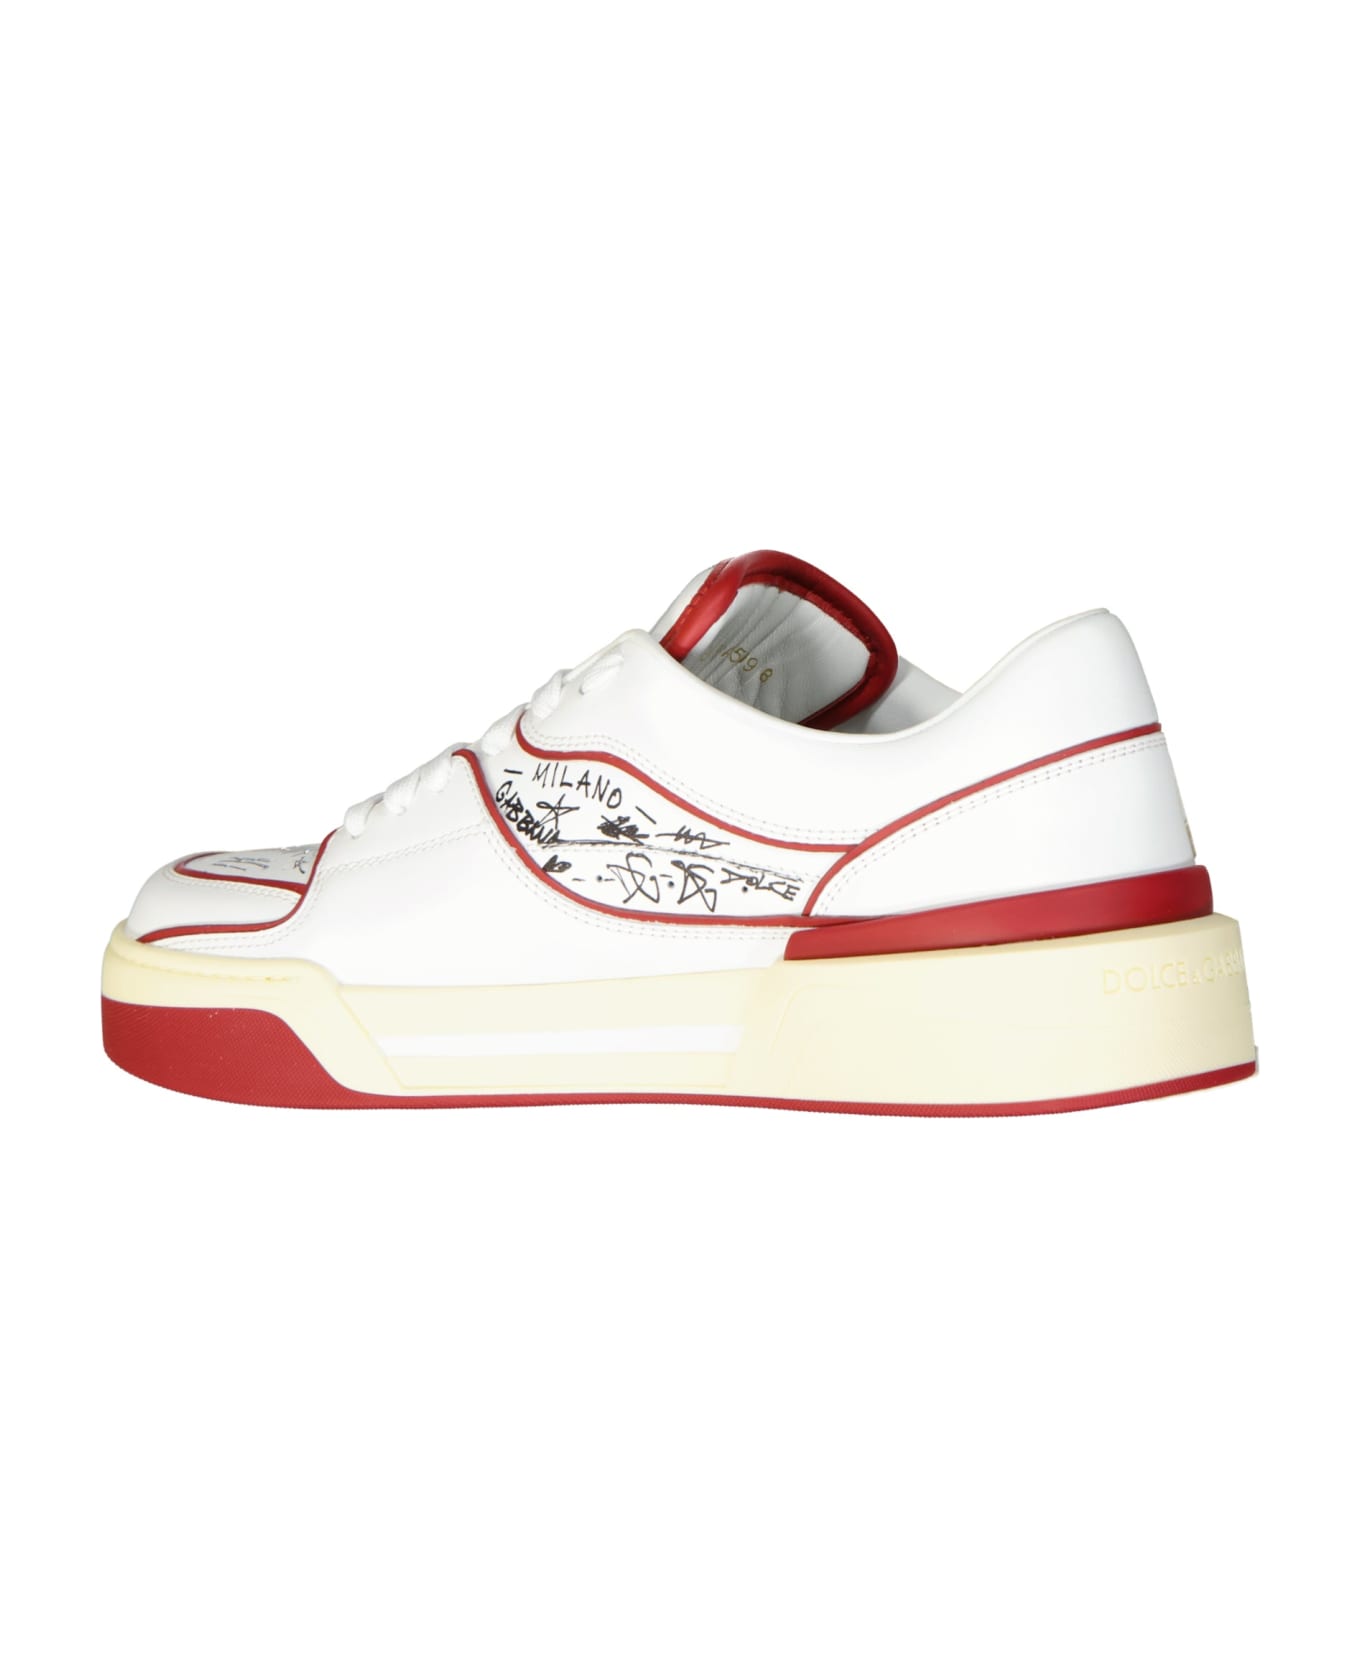 Dolce & Gabbana Printed Leather Sneakers - White